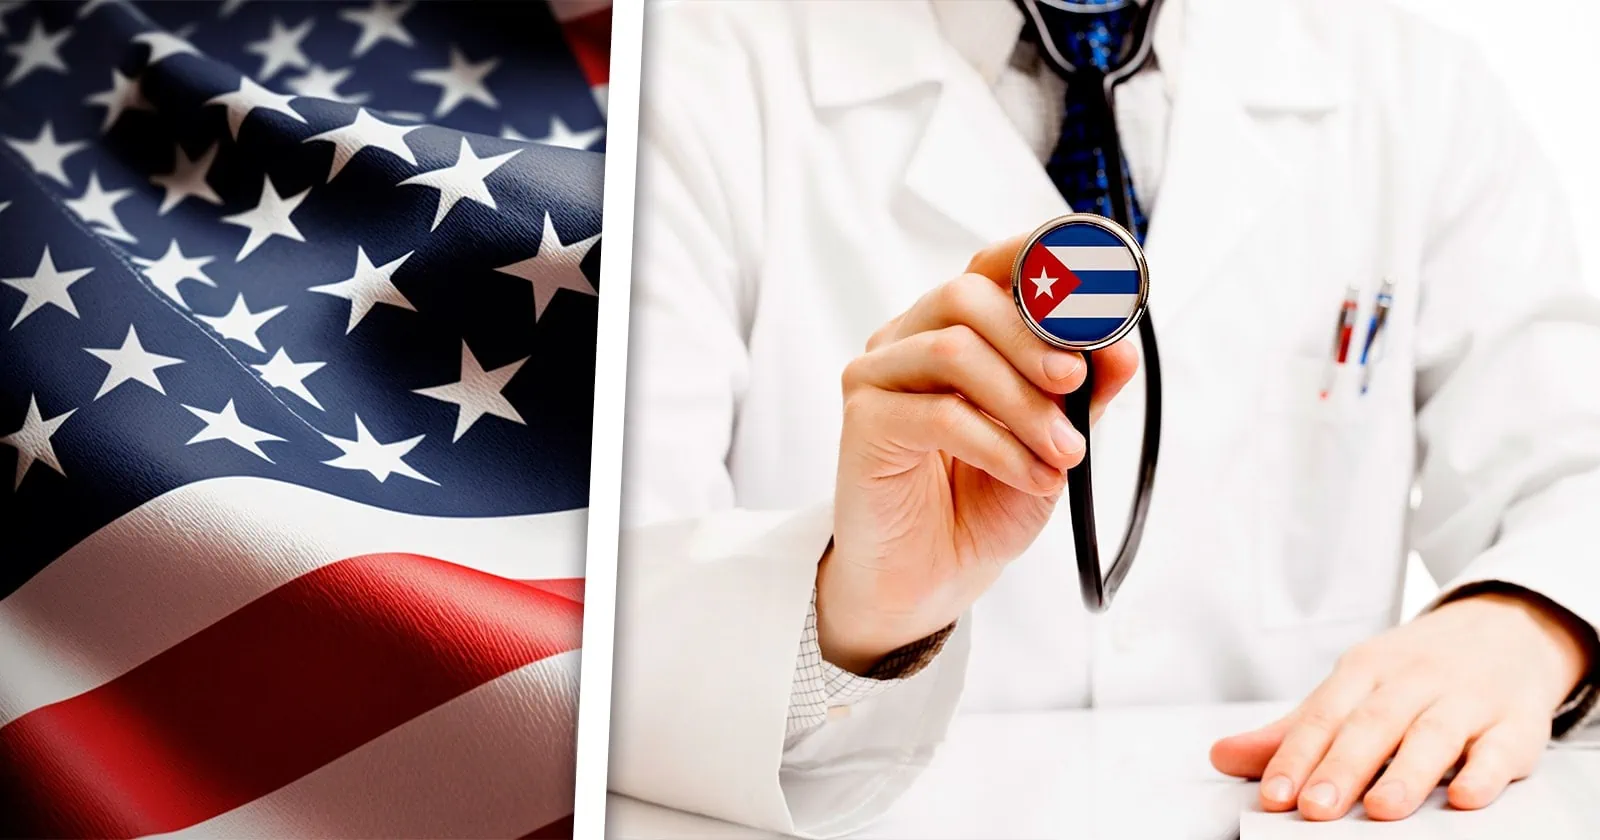 Exiled Cuban Doctors in the United States This Program Could Benefit Thousands